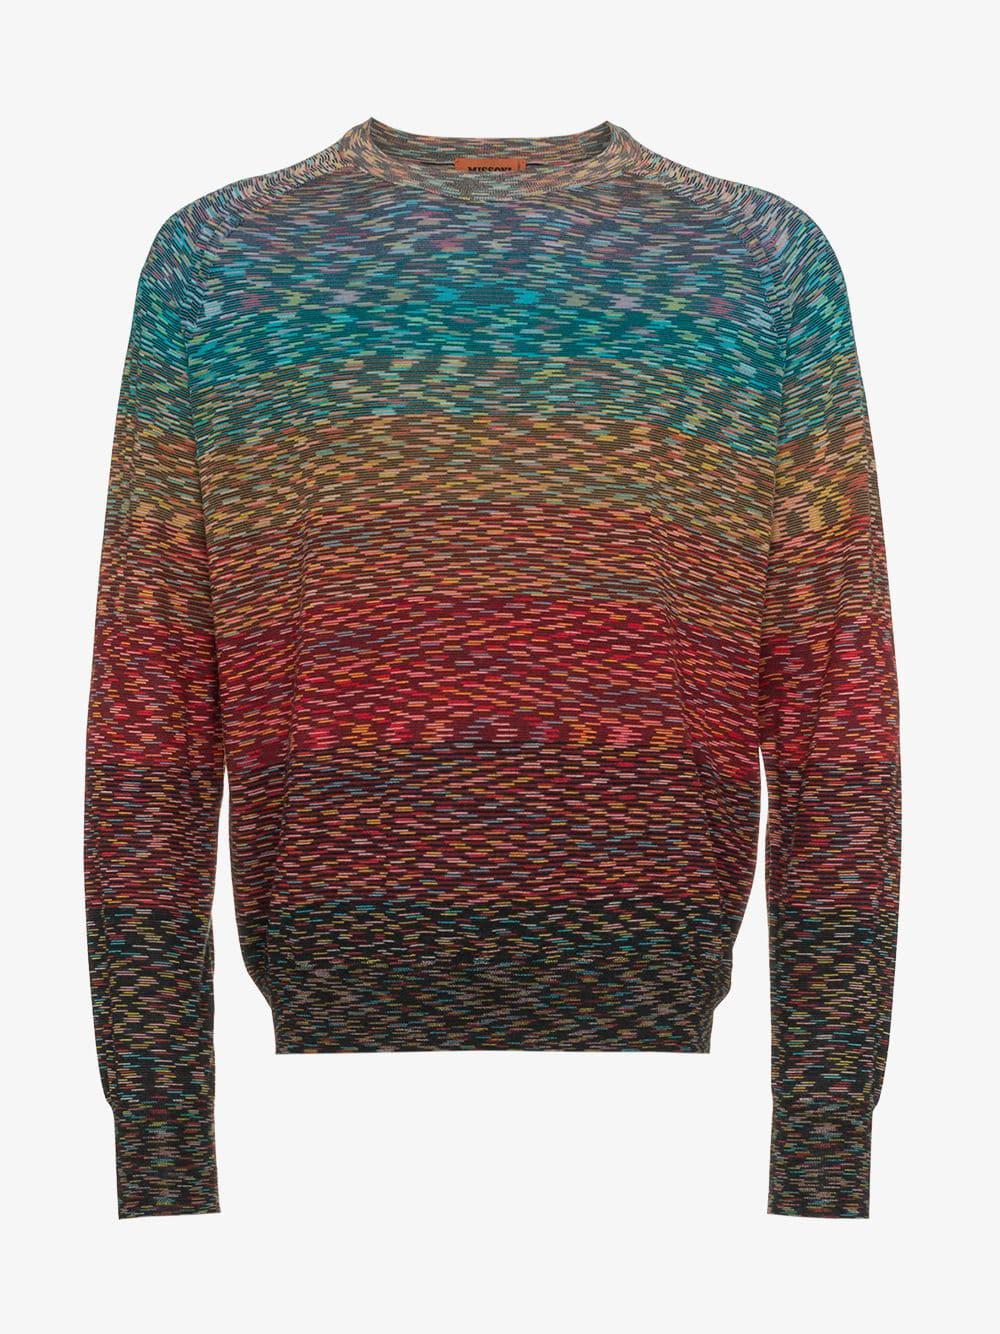 Missoni Wool Striped Sweater in Brown for Men - Lyst